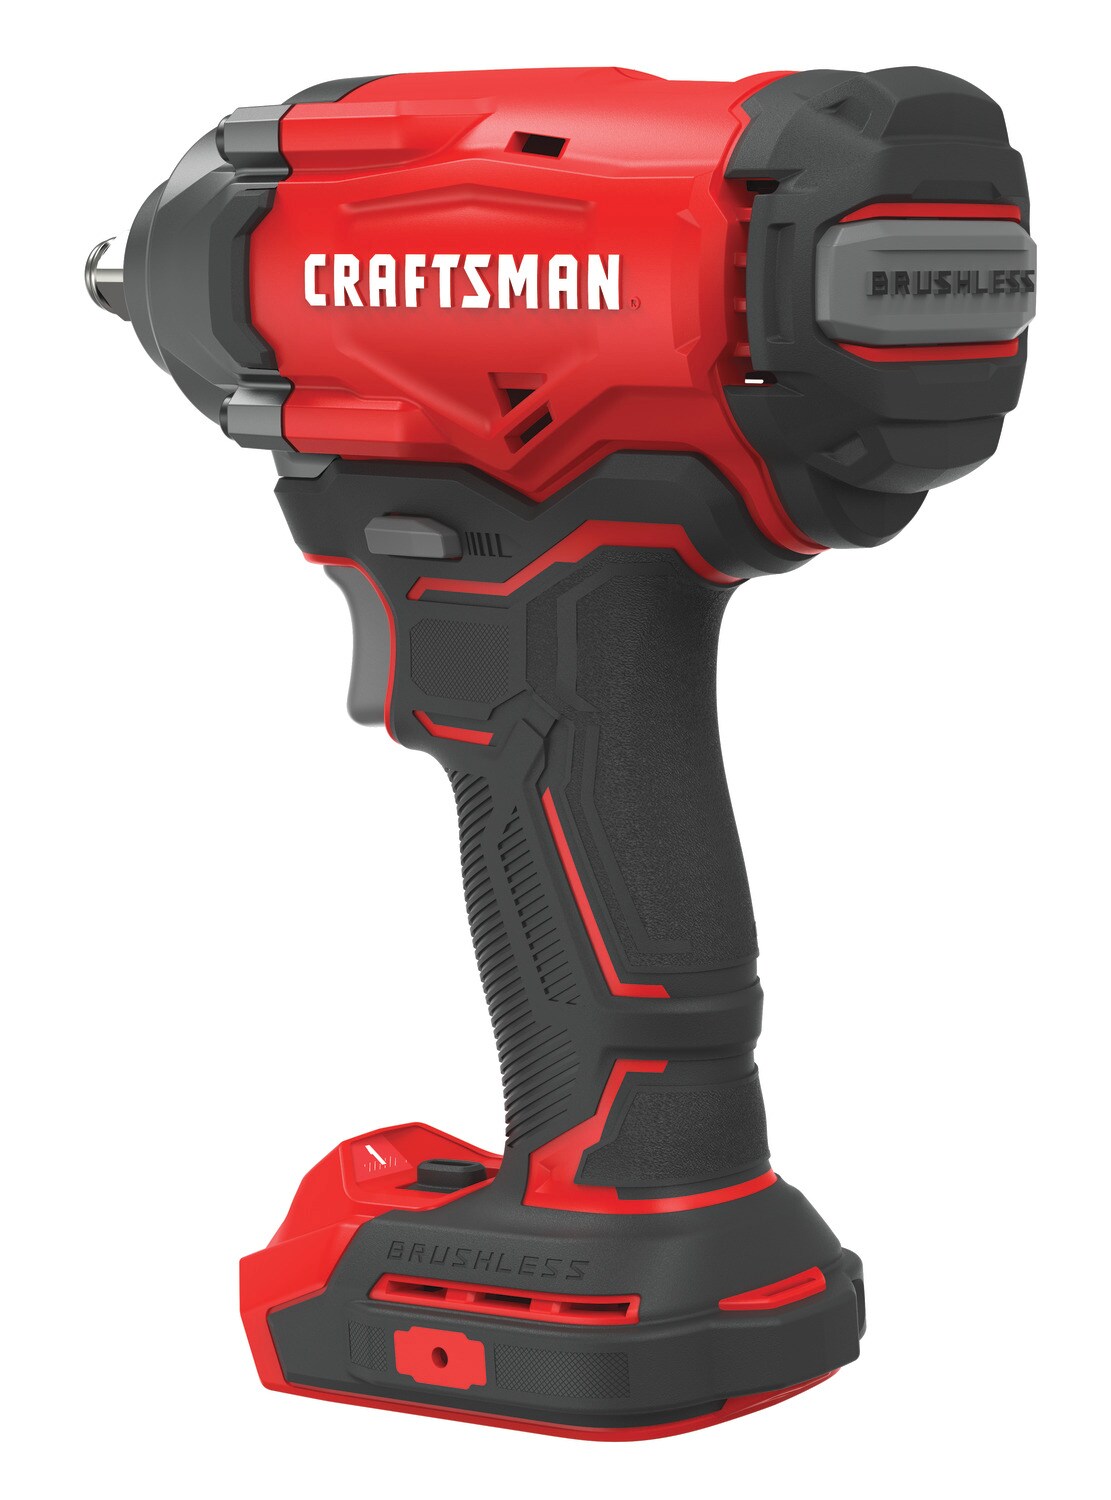 CRAFTSMAN V20 20-volt Max Variable Speed Brushless 1/2-in Drive ...